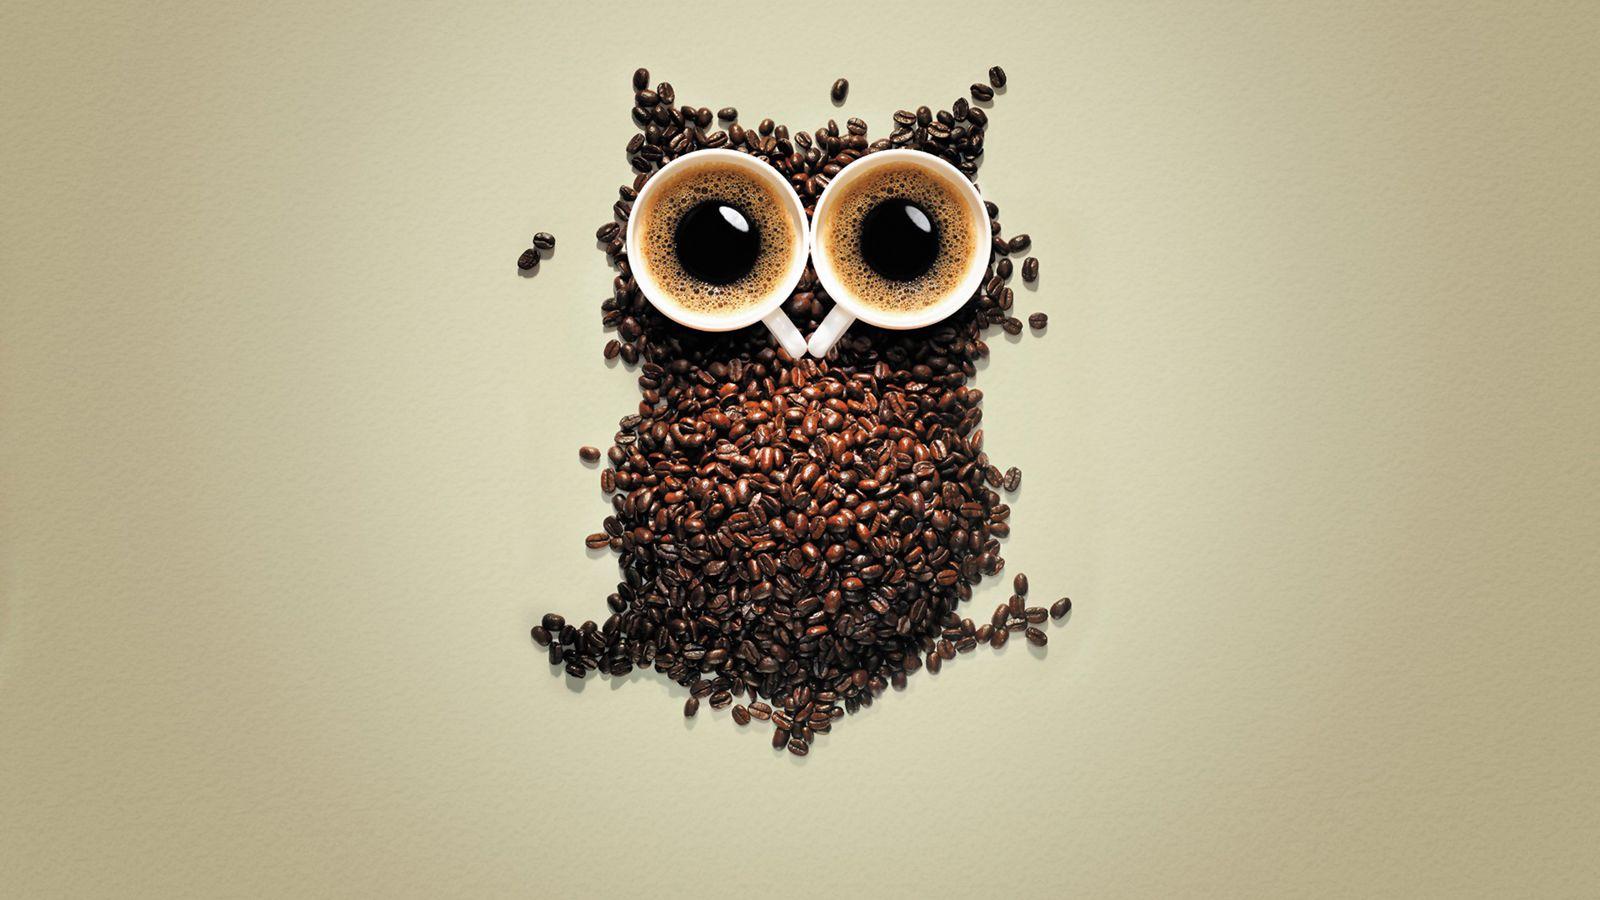 Wide Eyed Coffee Owl / Extra Strong Coffee Advertising Wallpaper